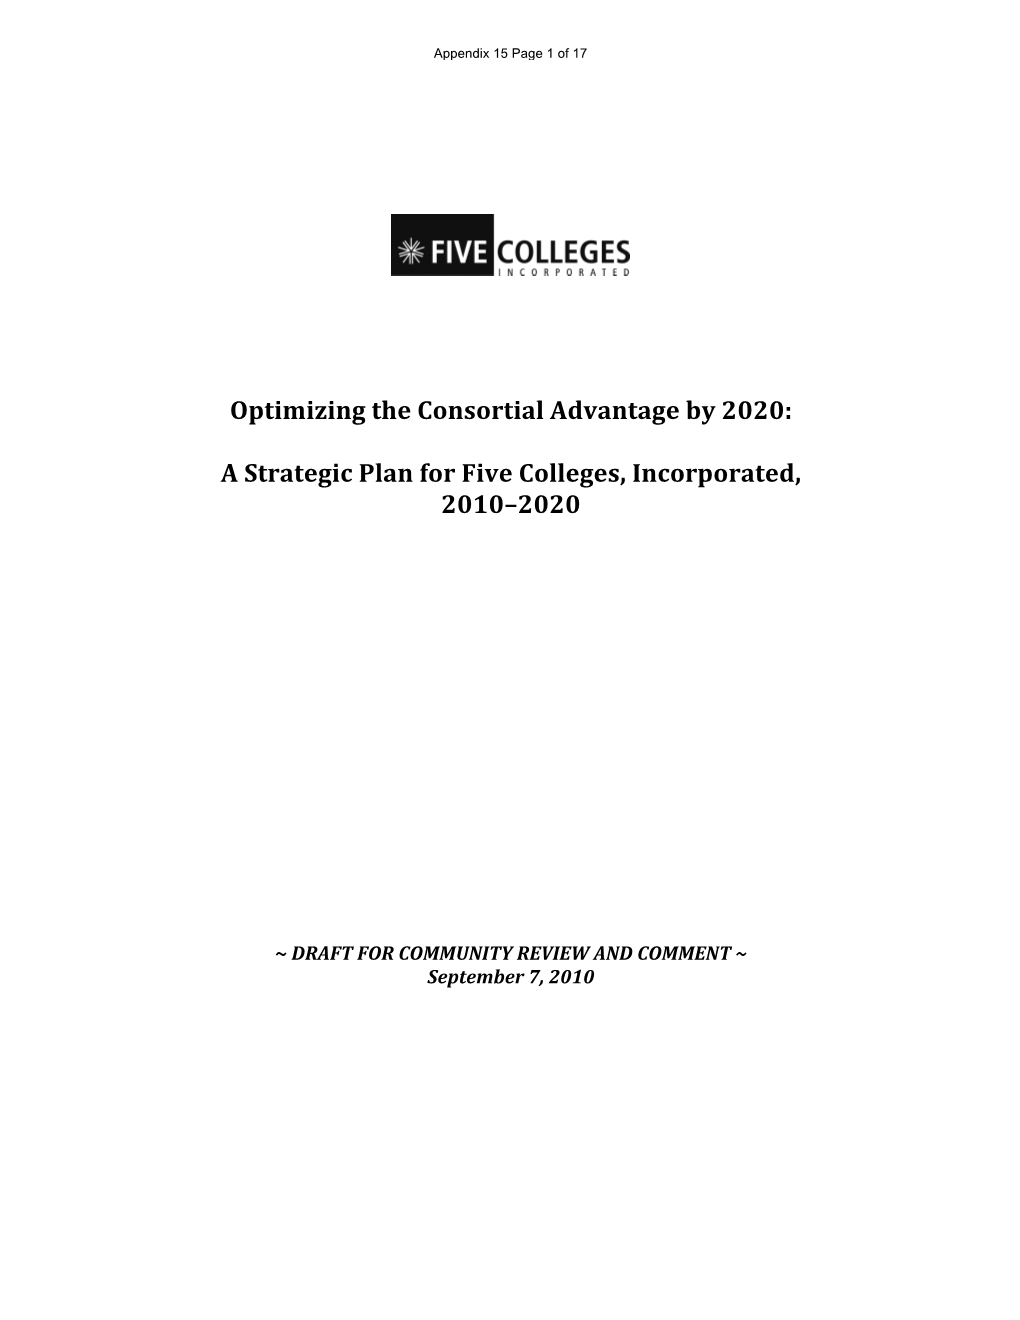 A Strategic Plan for Five Colleges, Incorporated, 2010–2020